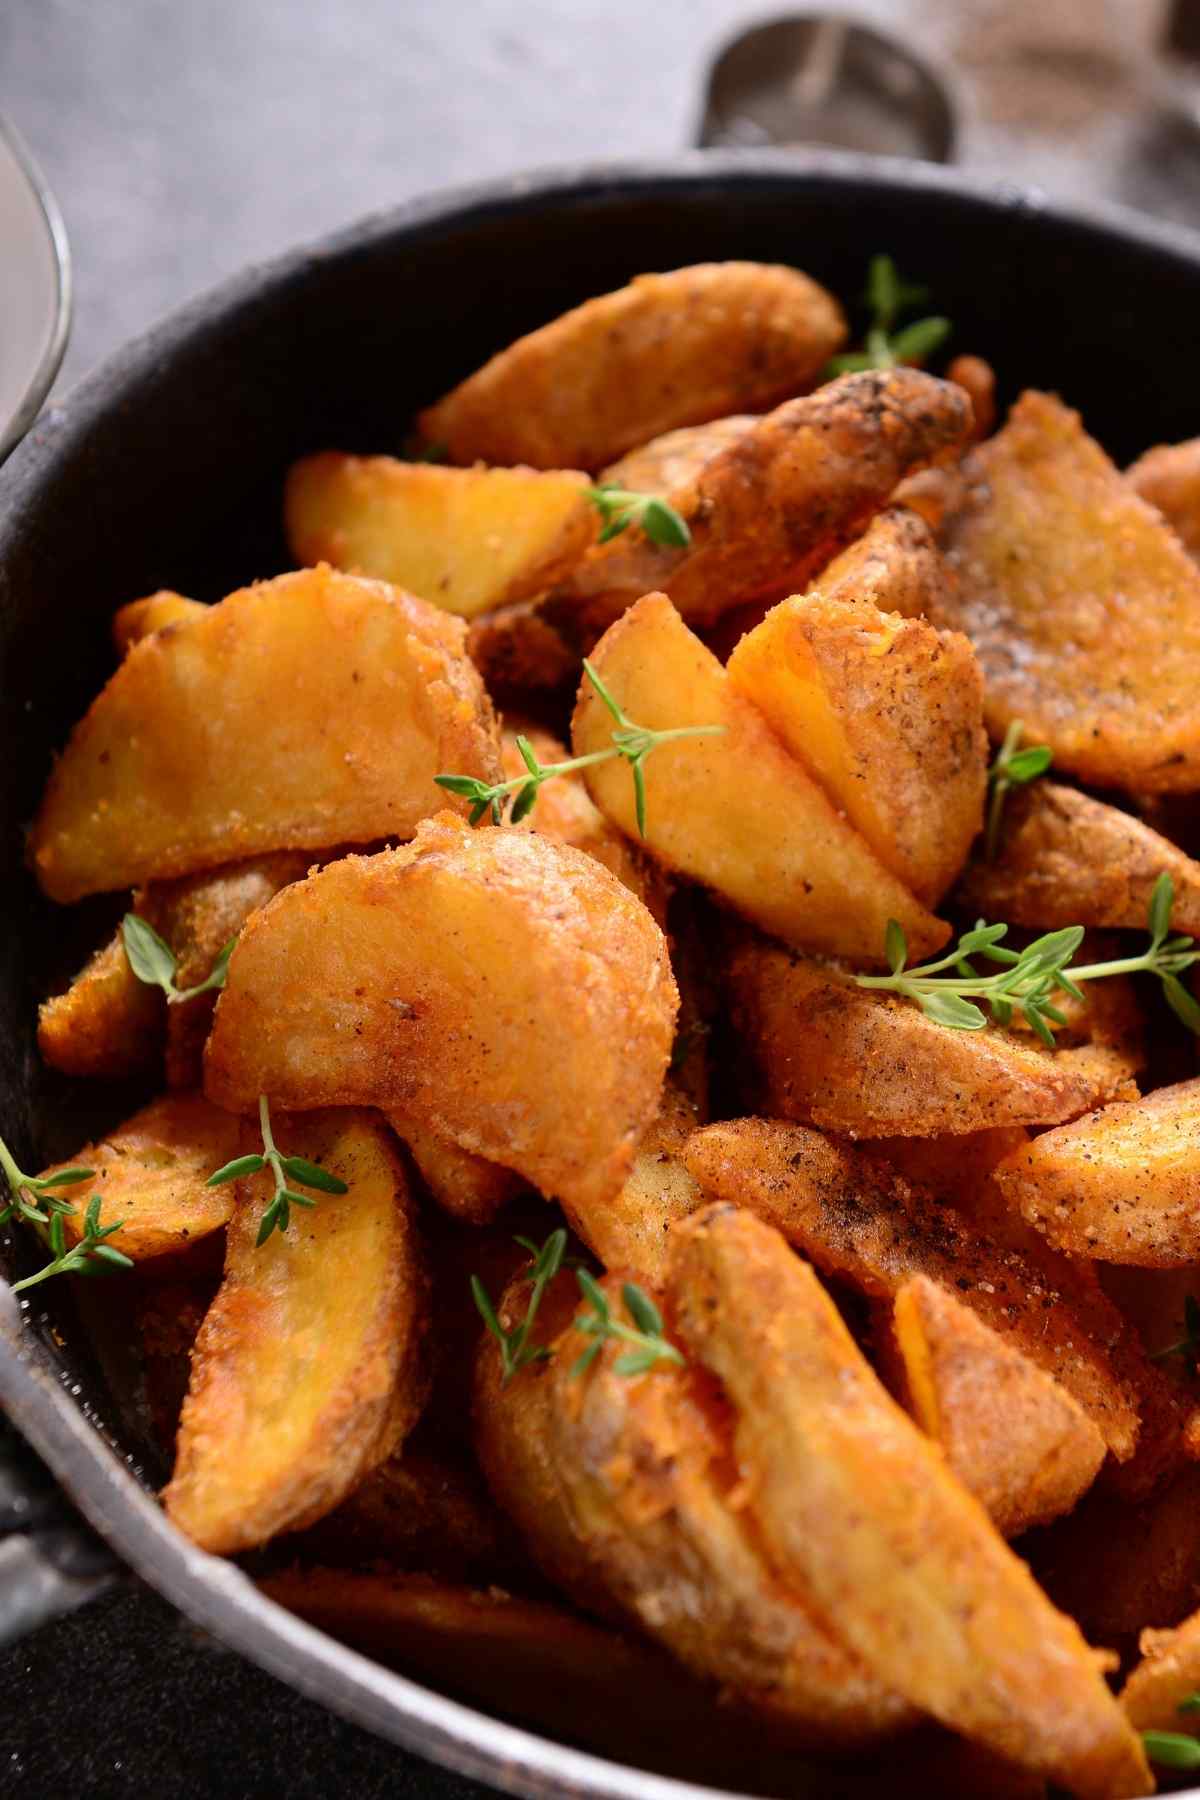 Whether you’re roasting, grilling, or frying them, potato wedges are a popular vegetable to enjoy as a side dish or an appetizer.